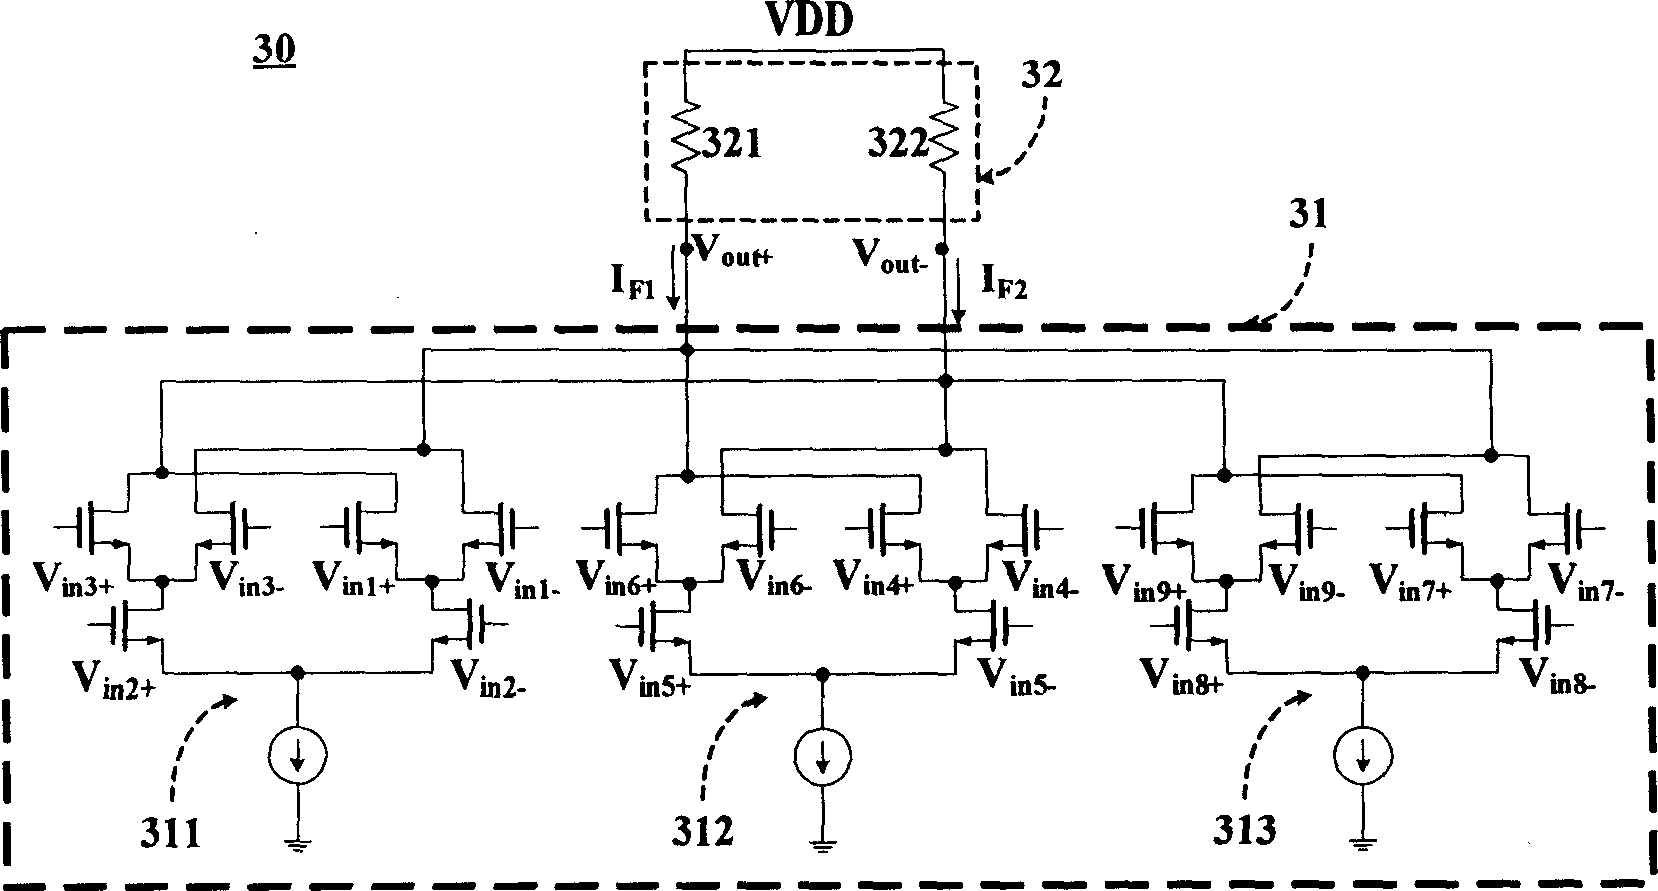 Hybrid two-layer folding circuit for high speed low-power consumption folding structure A/D converter